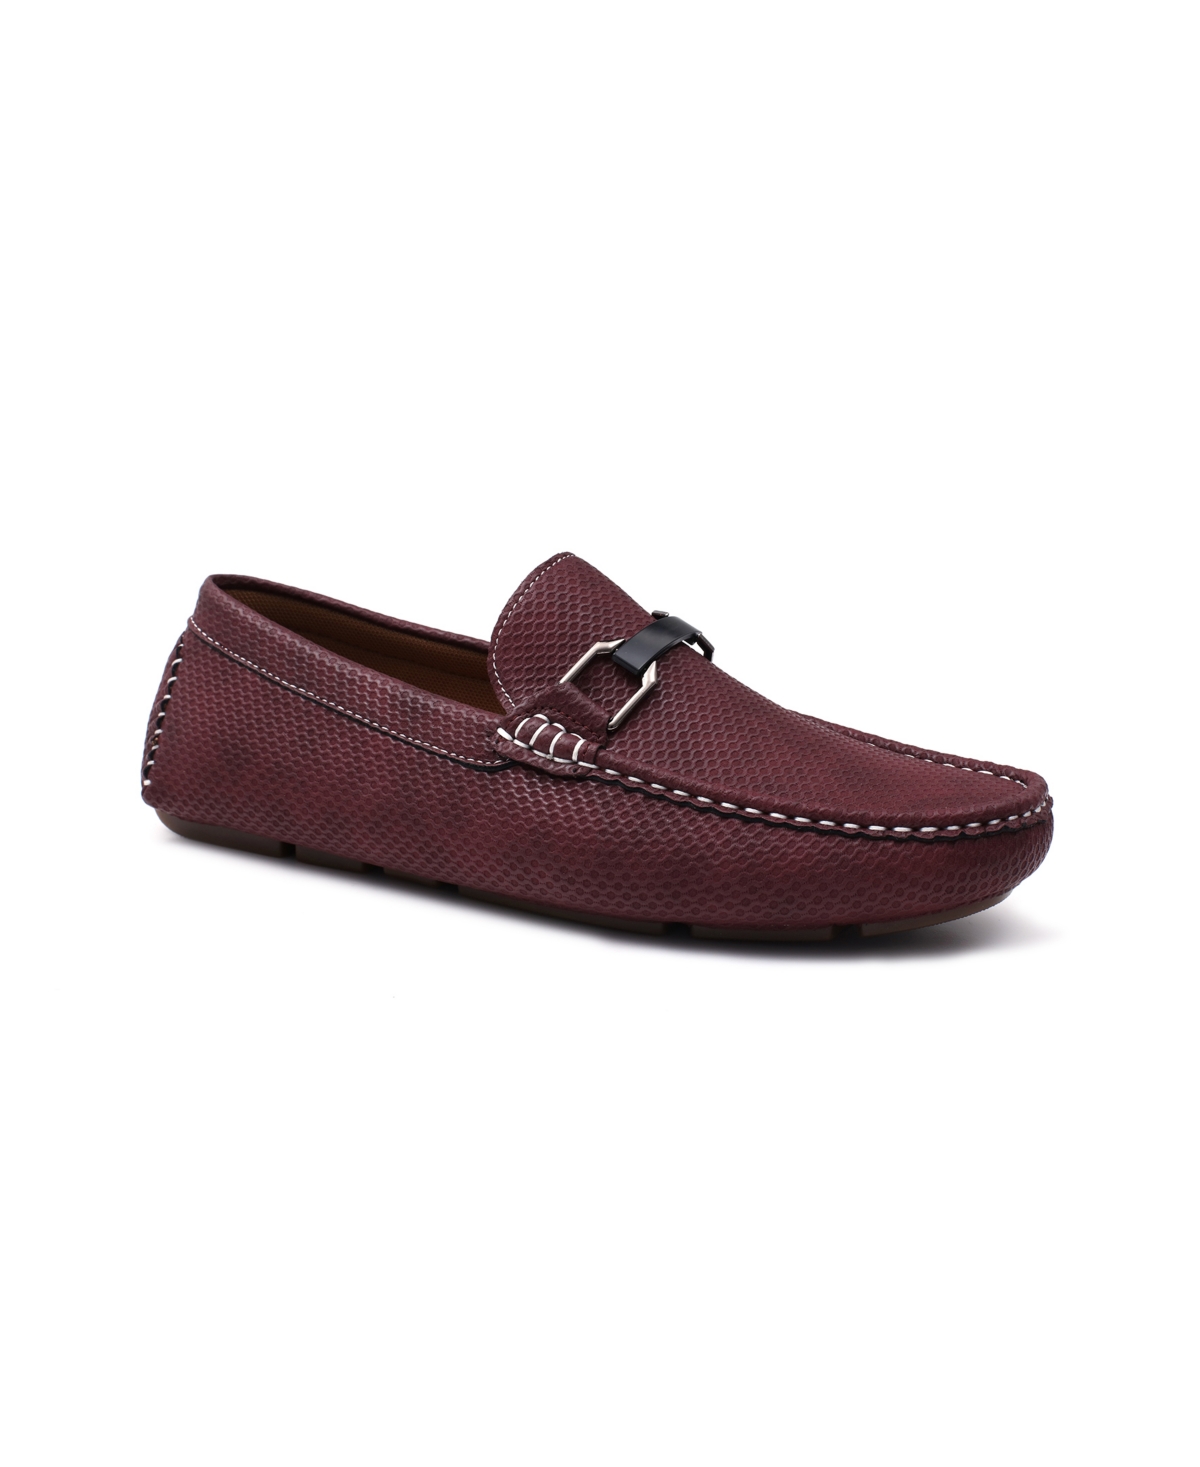 Aston Marc Men's Charter Driving Loafers In Maroon